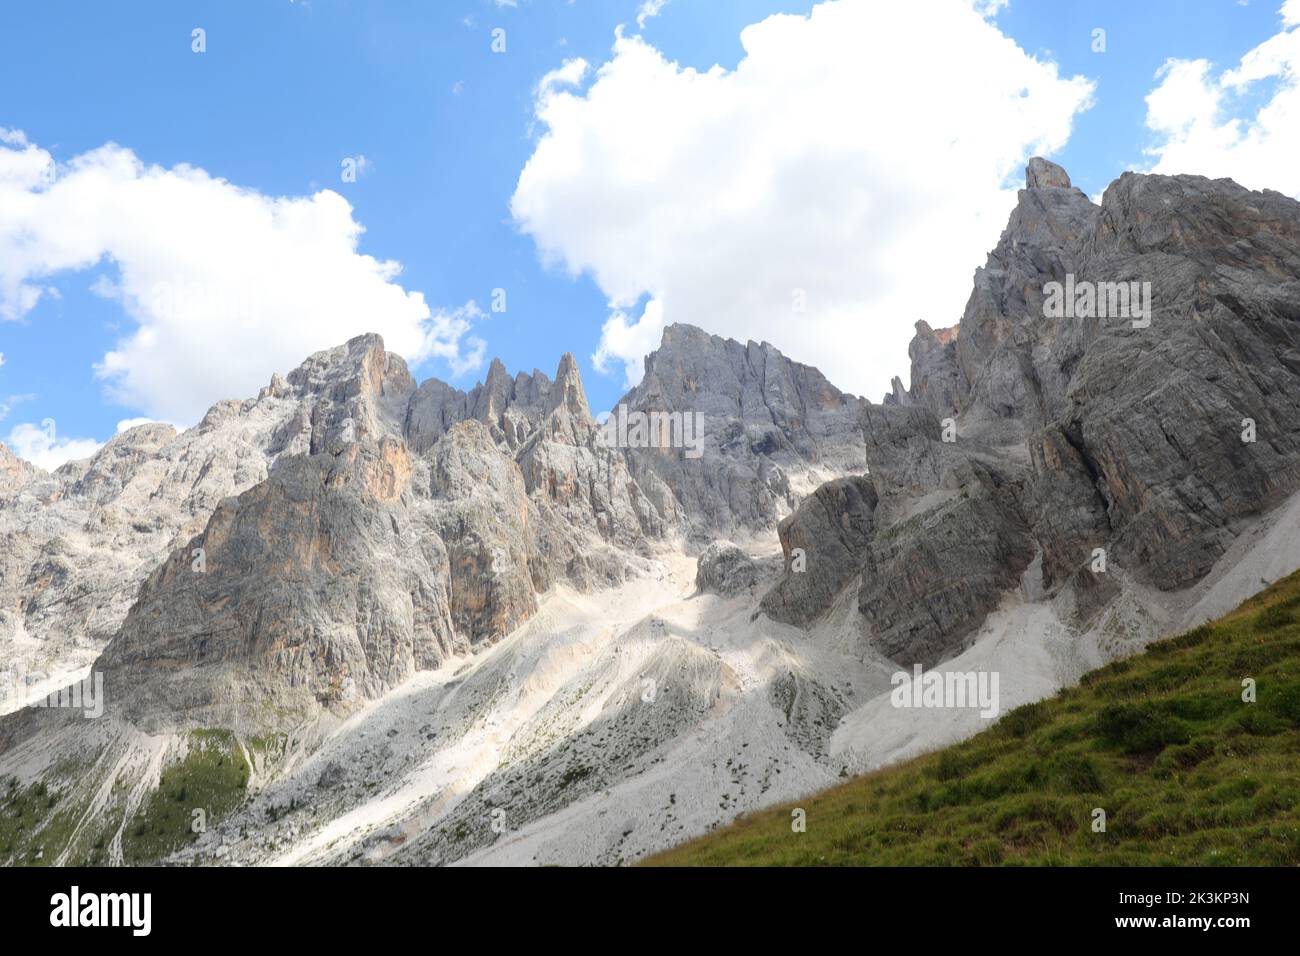 Italian Alps of the Dolomites group in Northern Italy between the Veneto and Trentino regions in summer Stock Photo